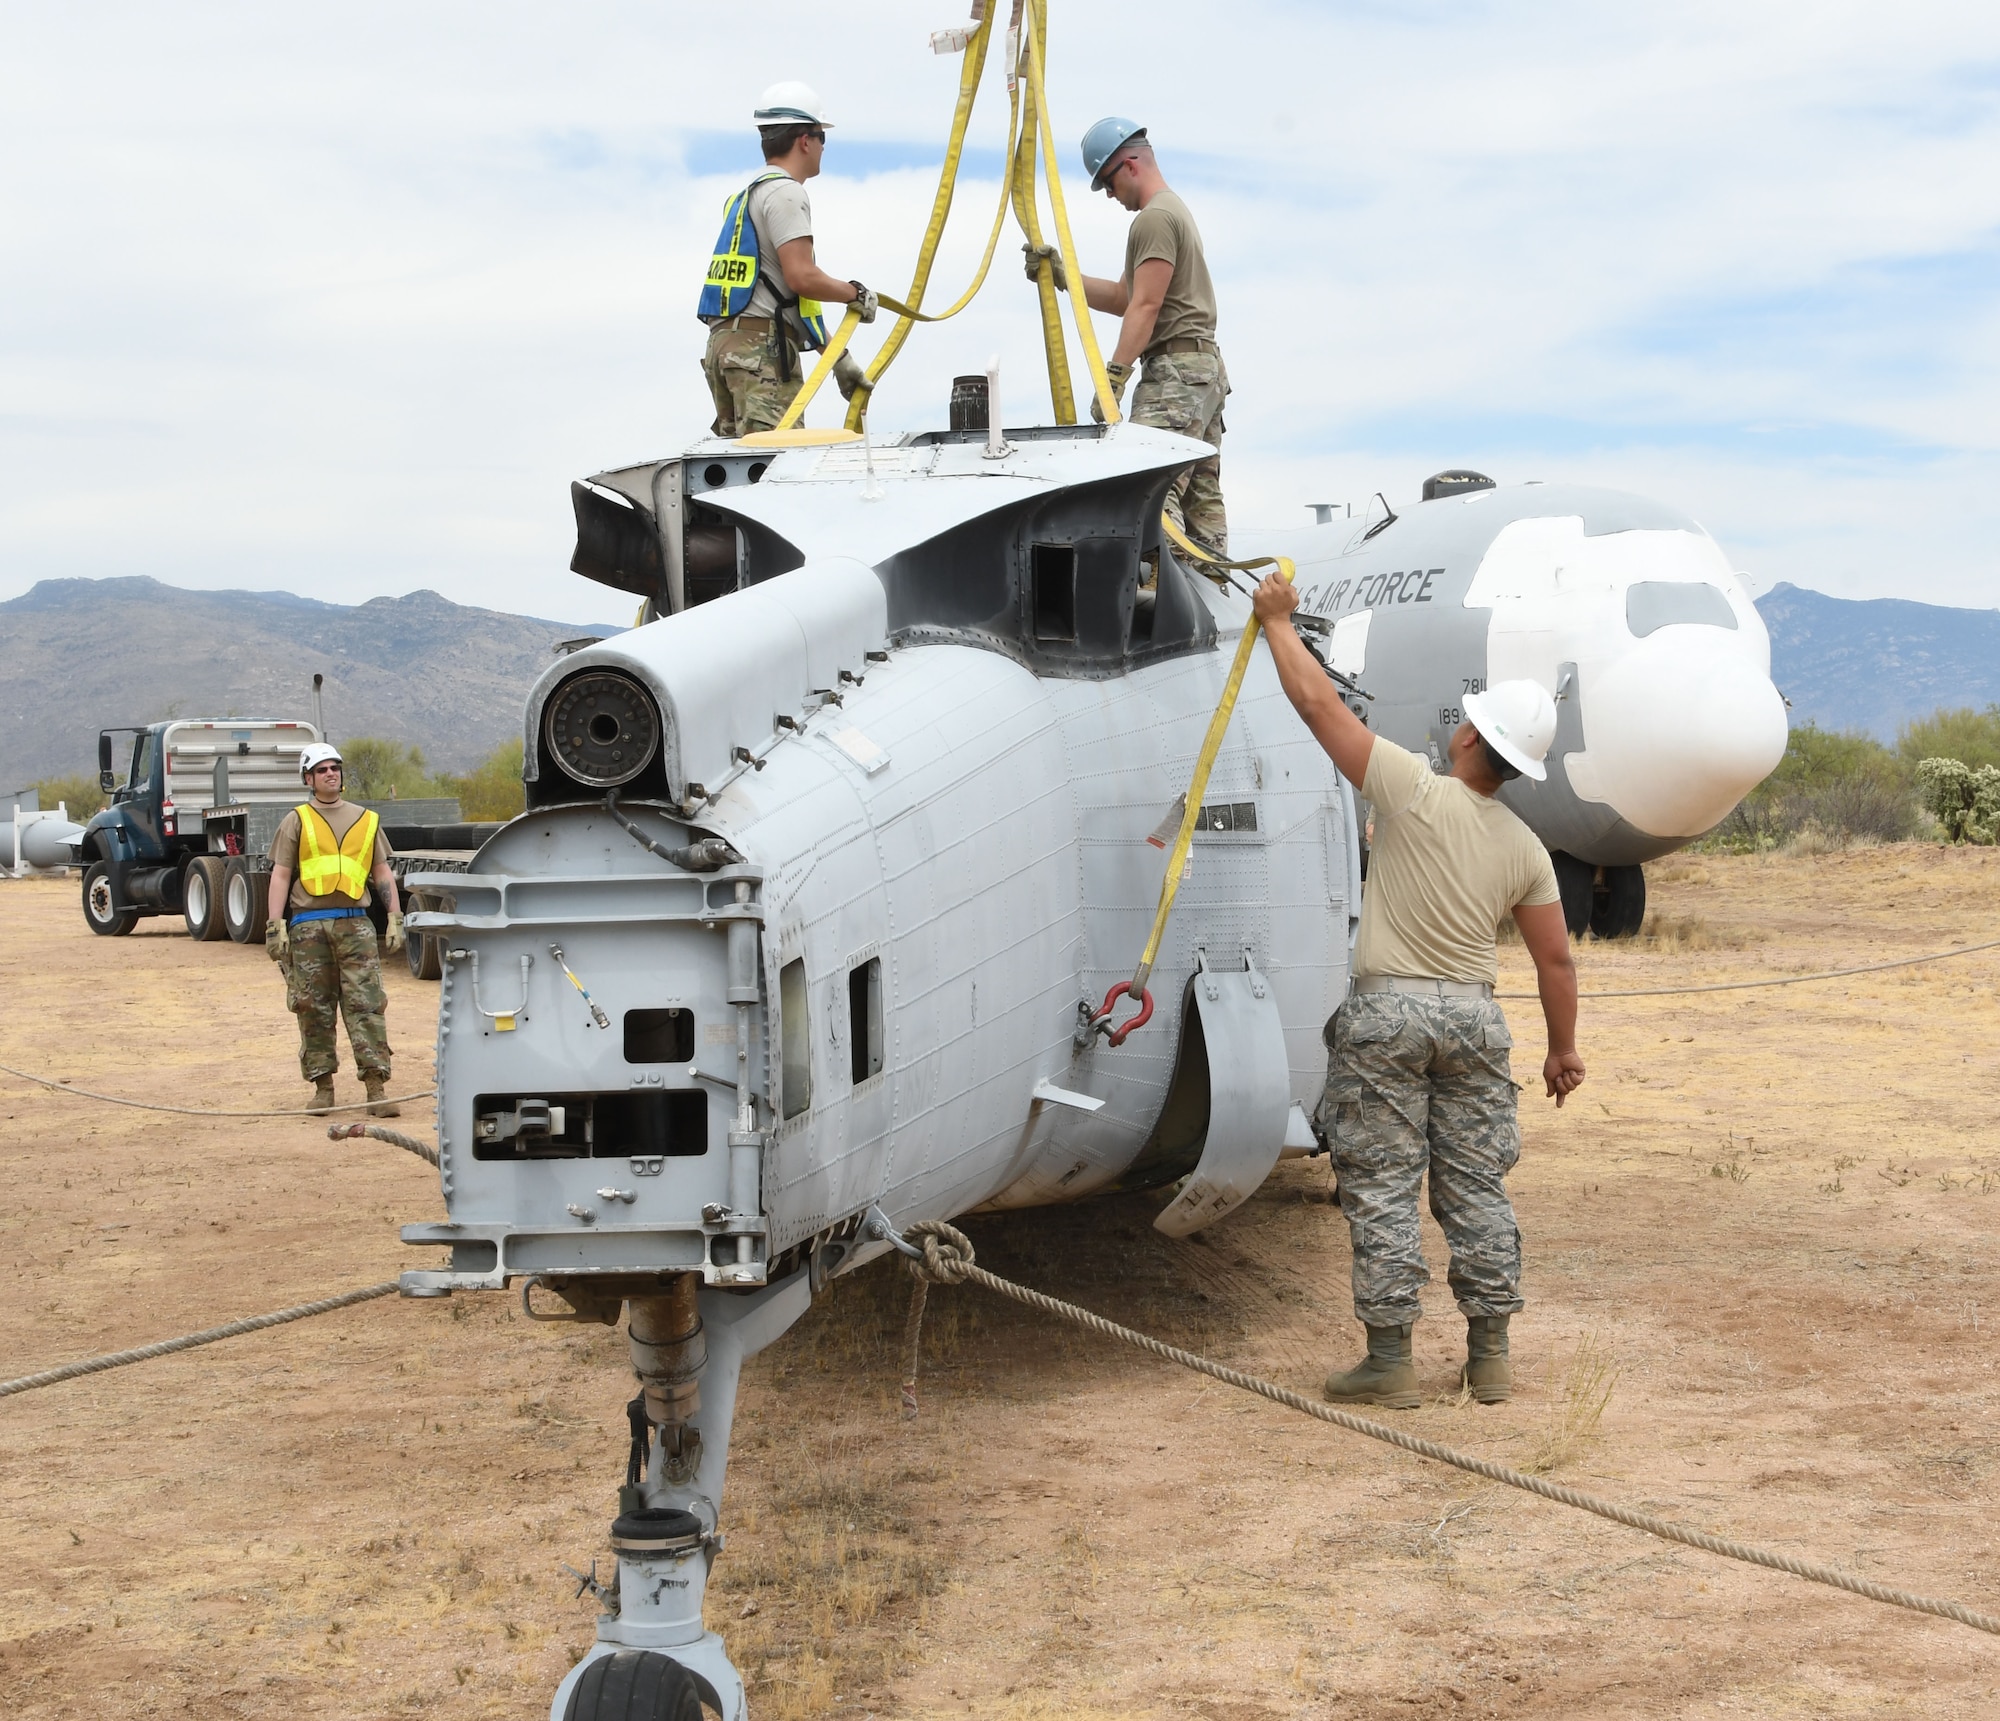 Airmen prepare a helicopter.